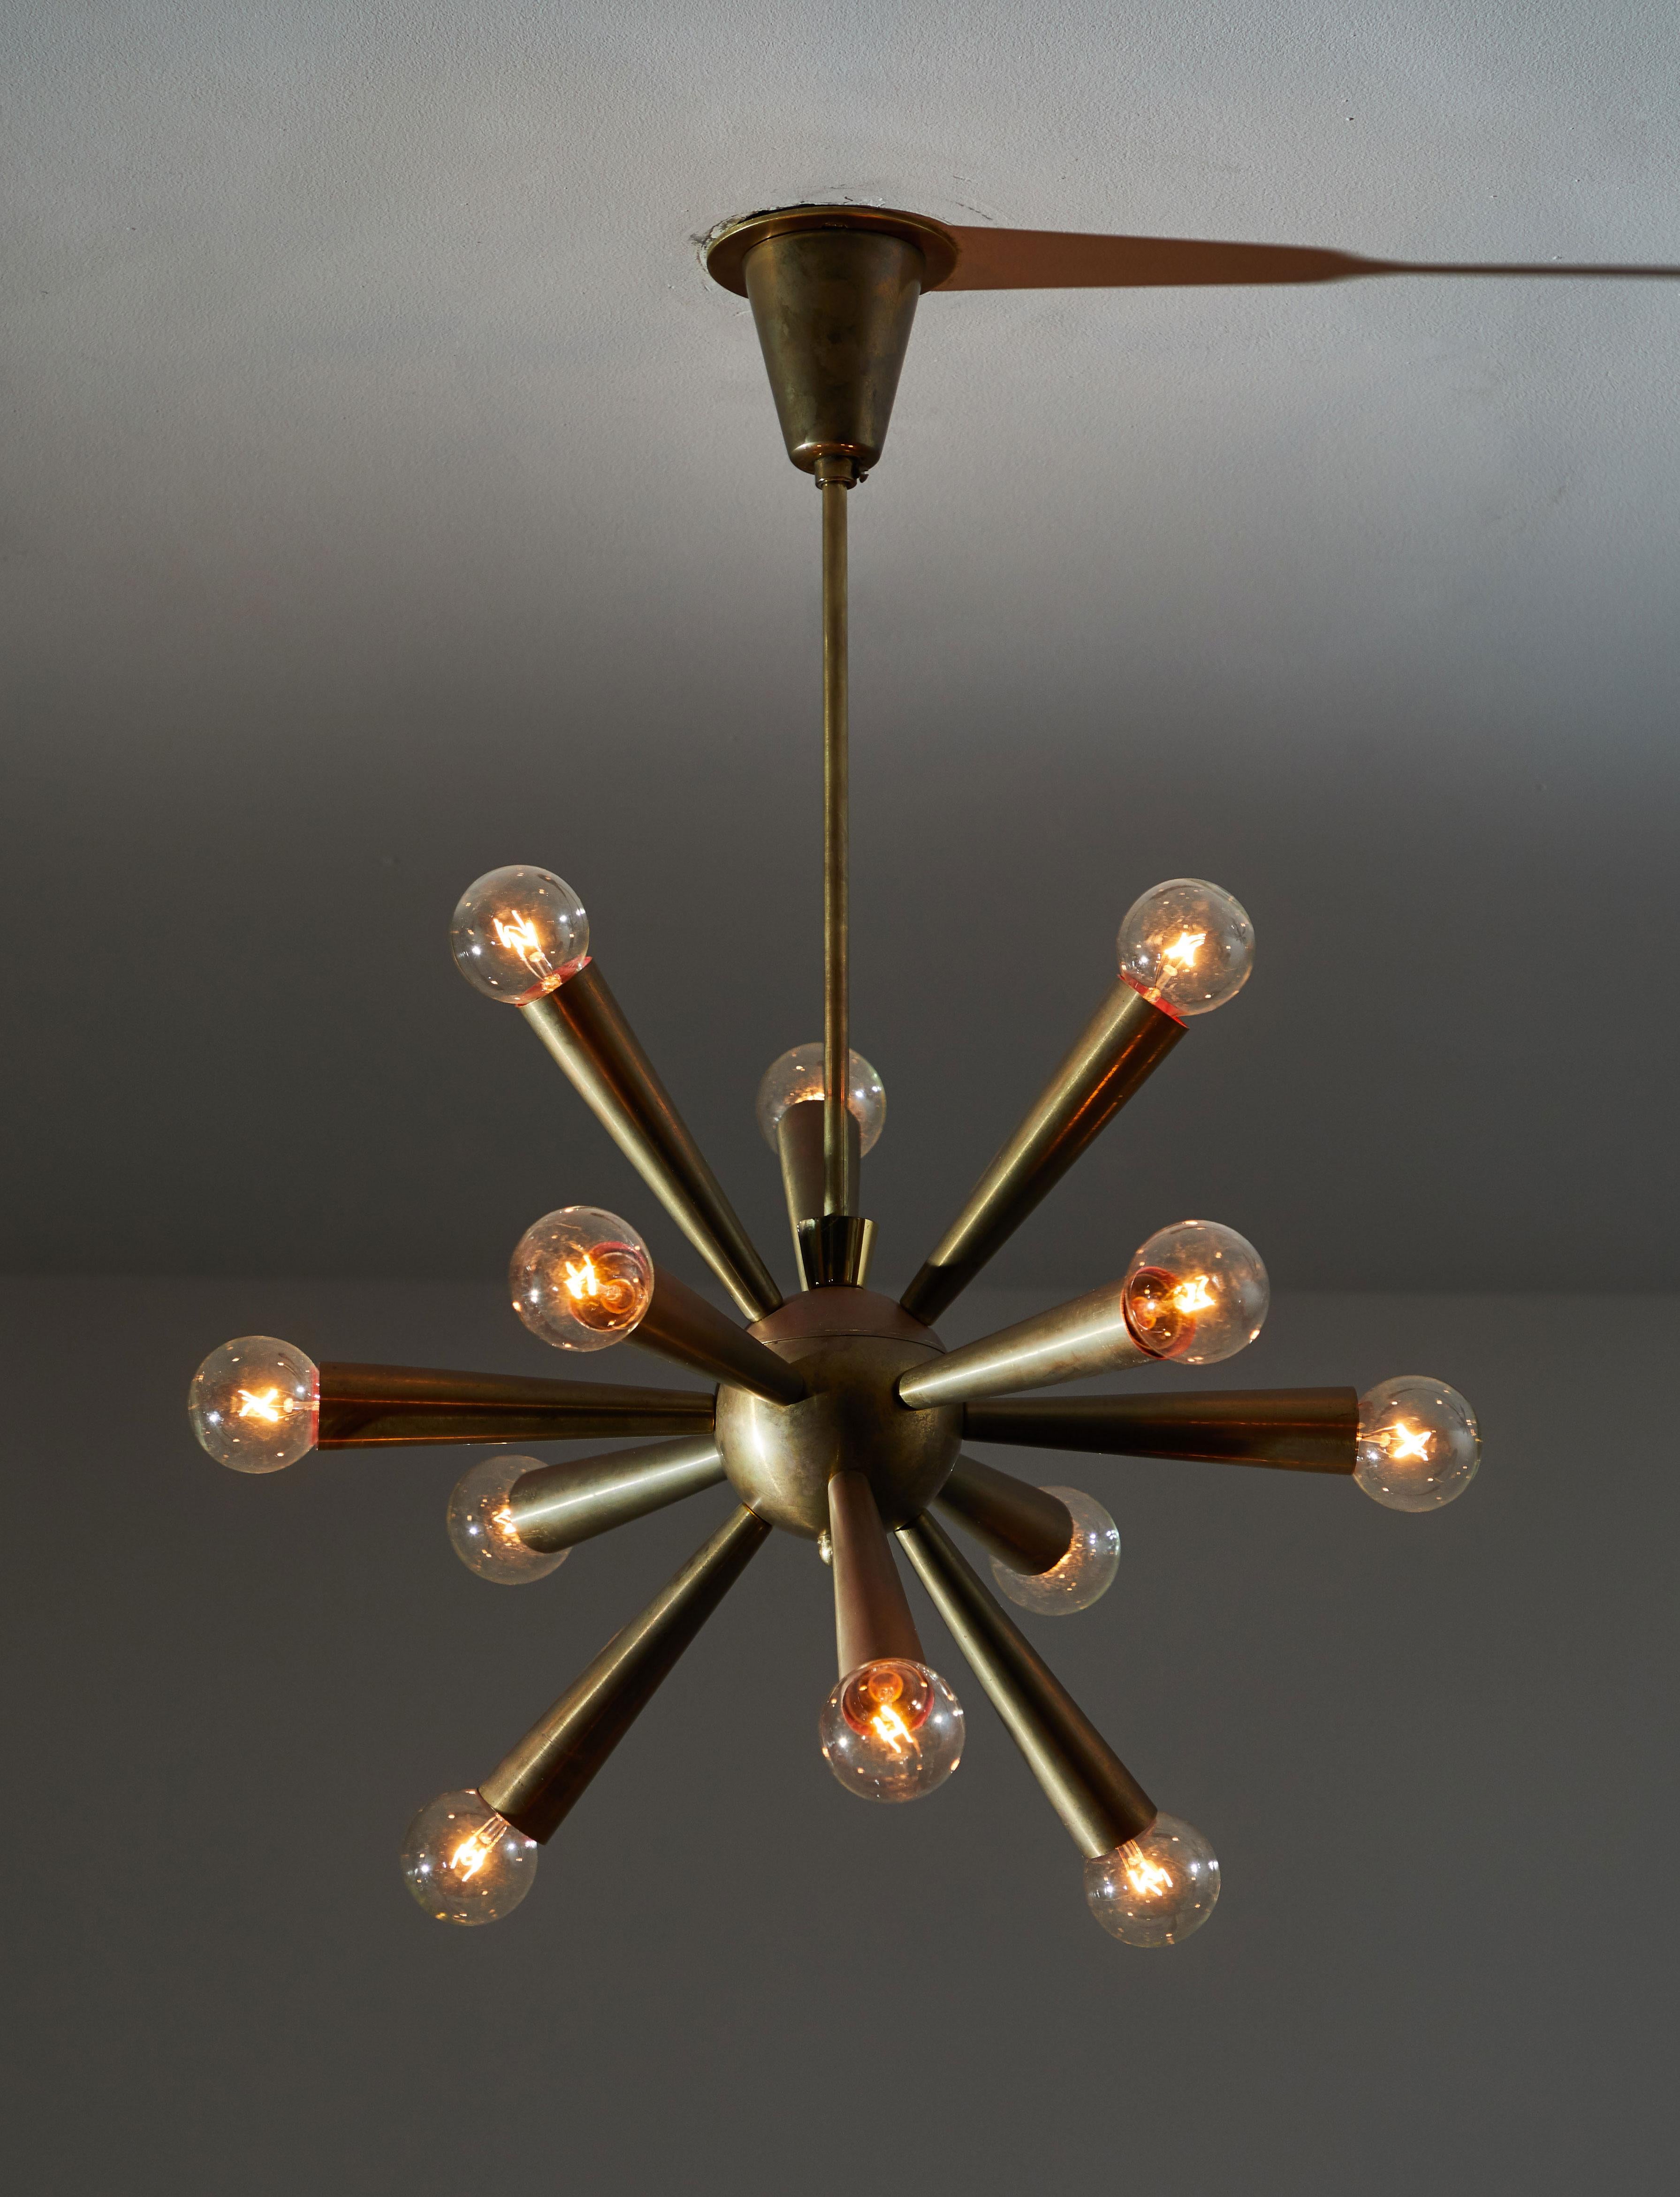 Chandelier manufactured in Austria, circa 1950s. Brass with original canopy and brass ceiling plate. Rewired for US junction boxes. Takes twelve European candelabra 40w maximum bulbs. Height displayed is from canopy to bottom of fixture.